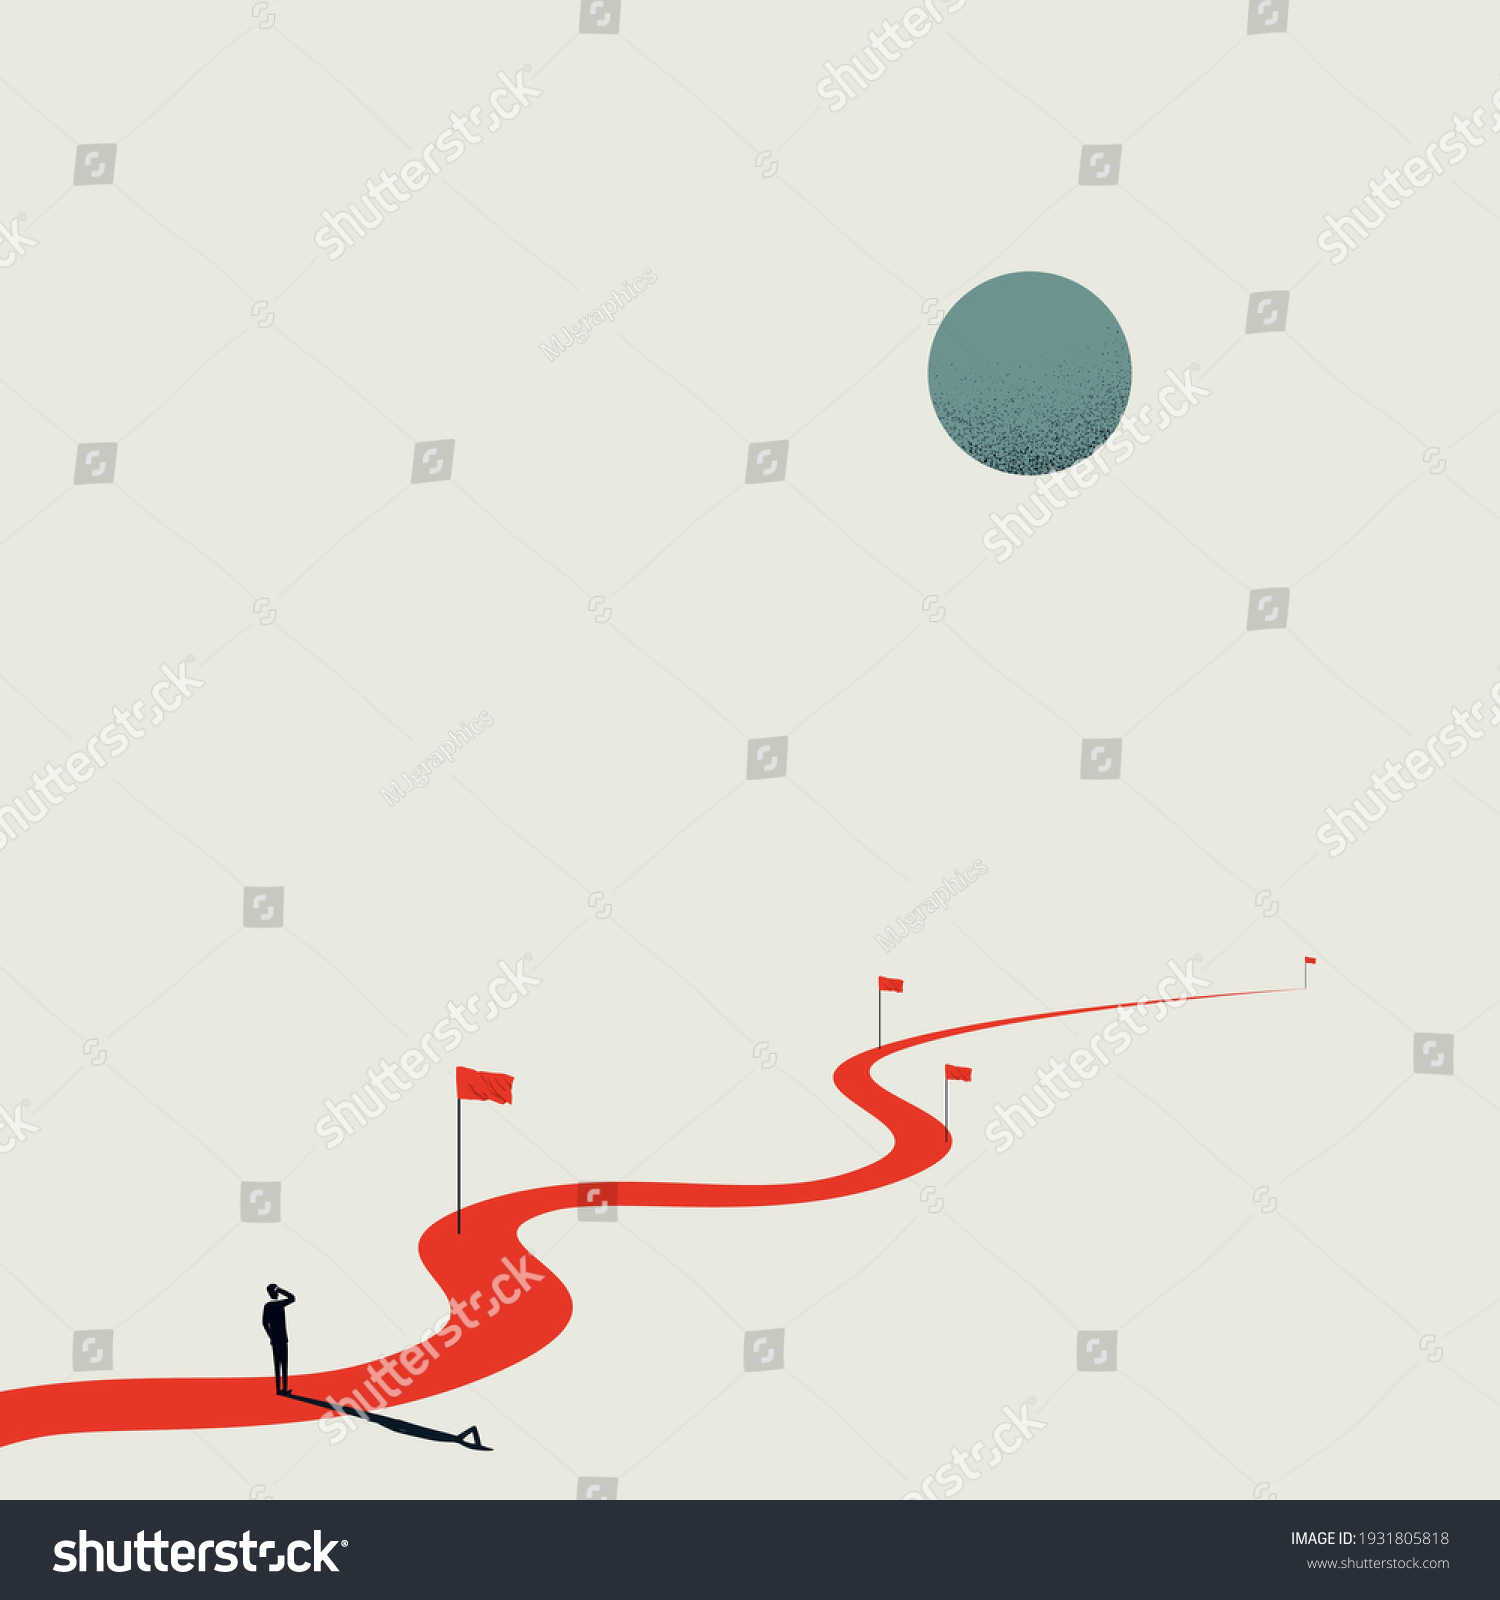 SVG of Business project milestones vector concept. Man standing at the start of the road, path. Symbol of planning, strategy. Eps10 design, minimal art illustration. svg